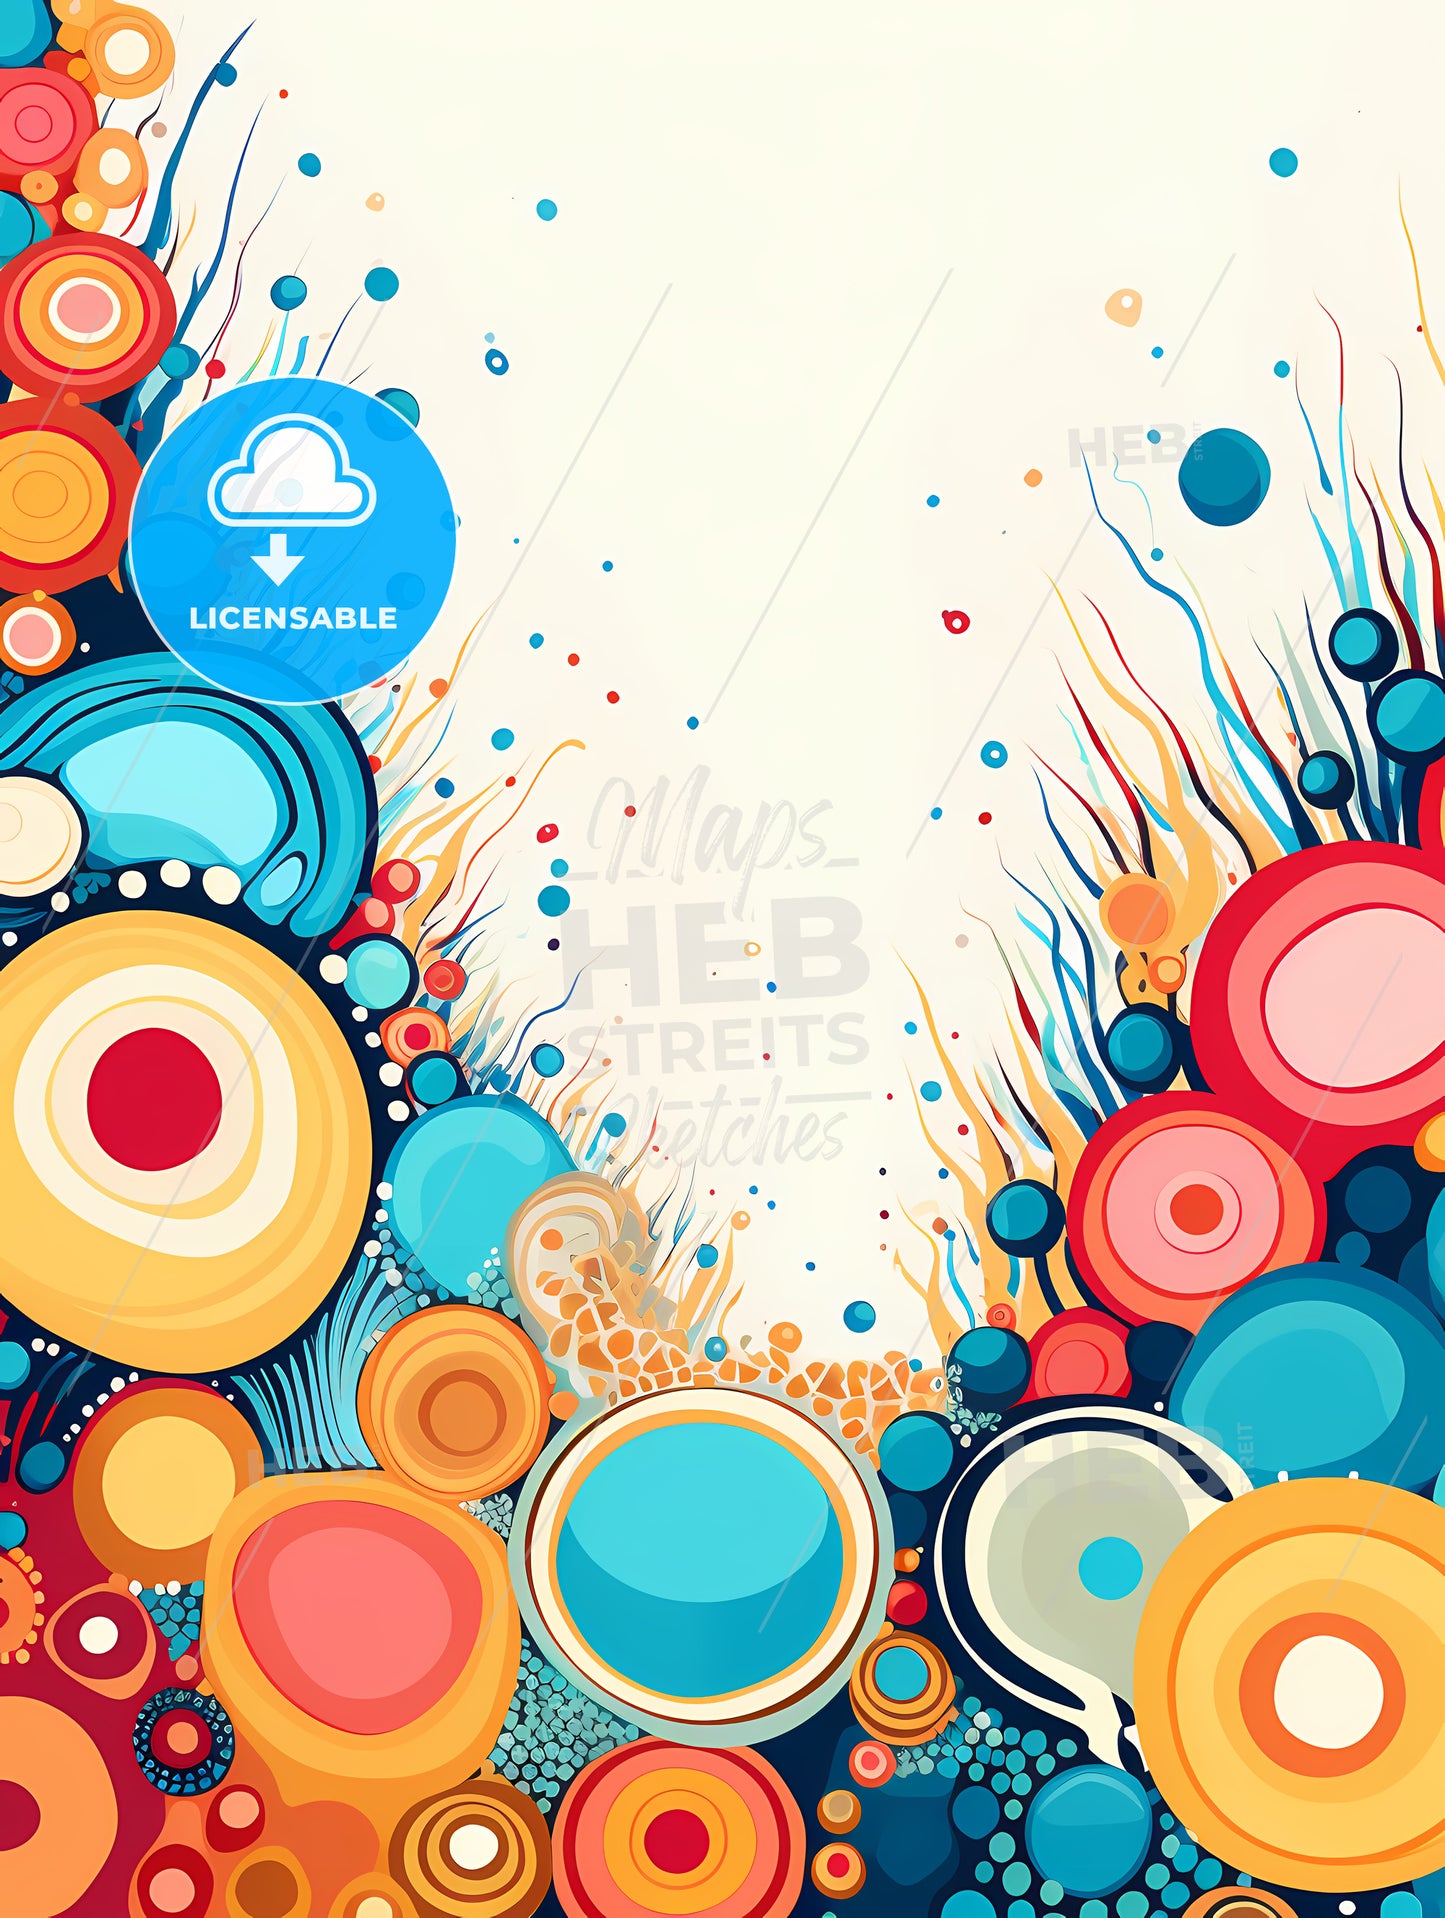 Colorful Art With Circles And Lines